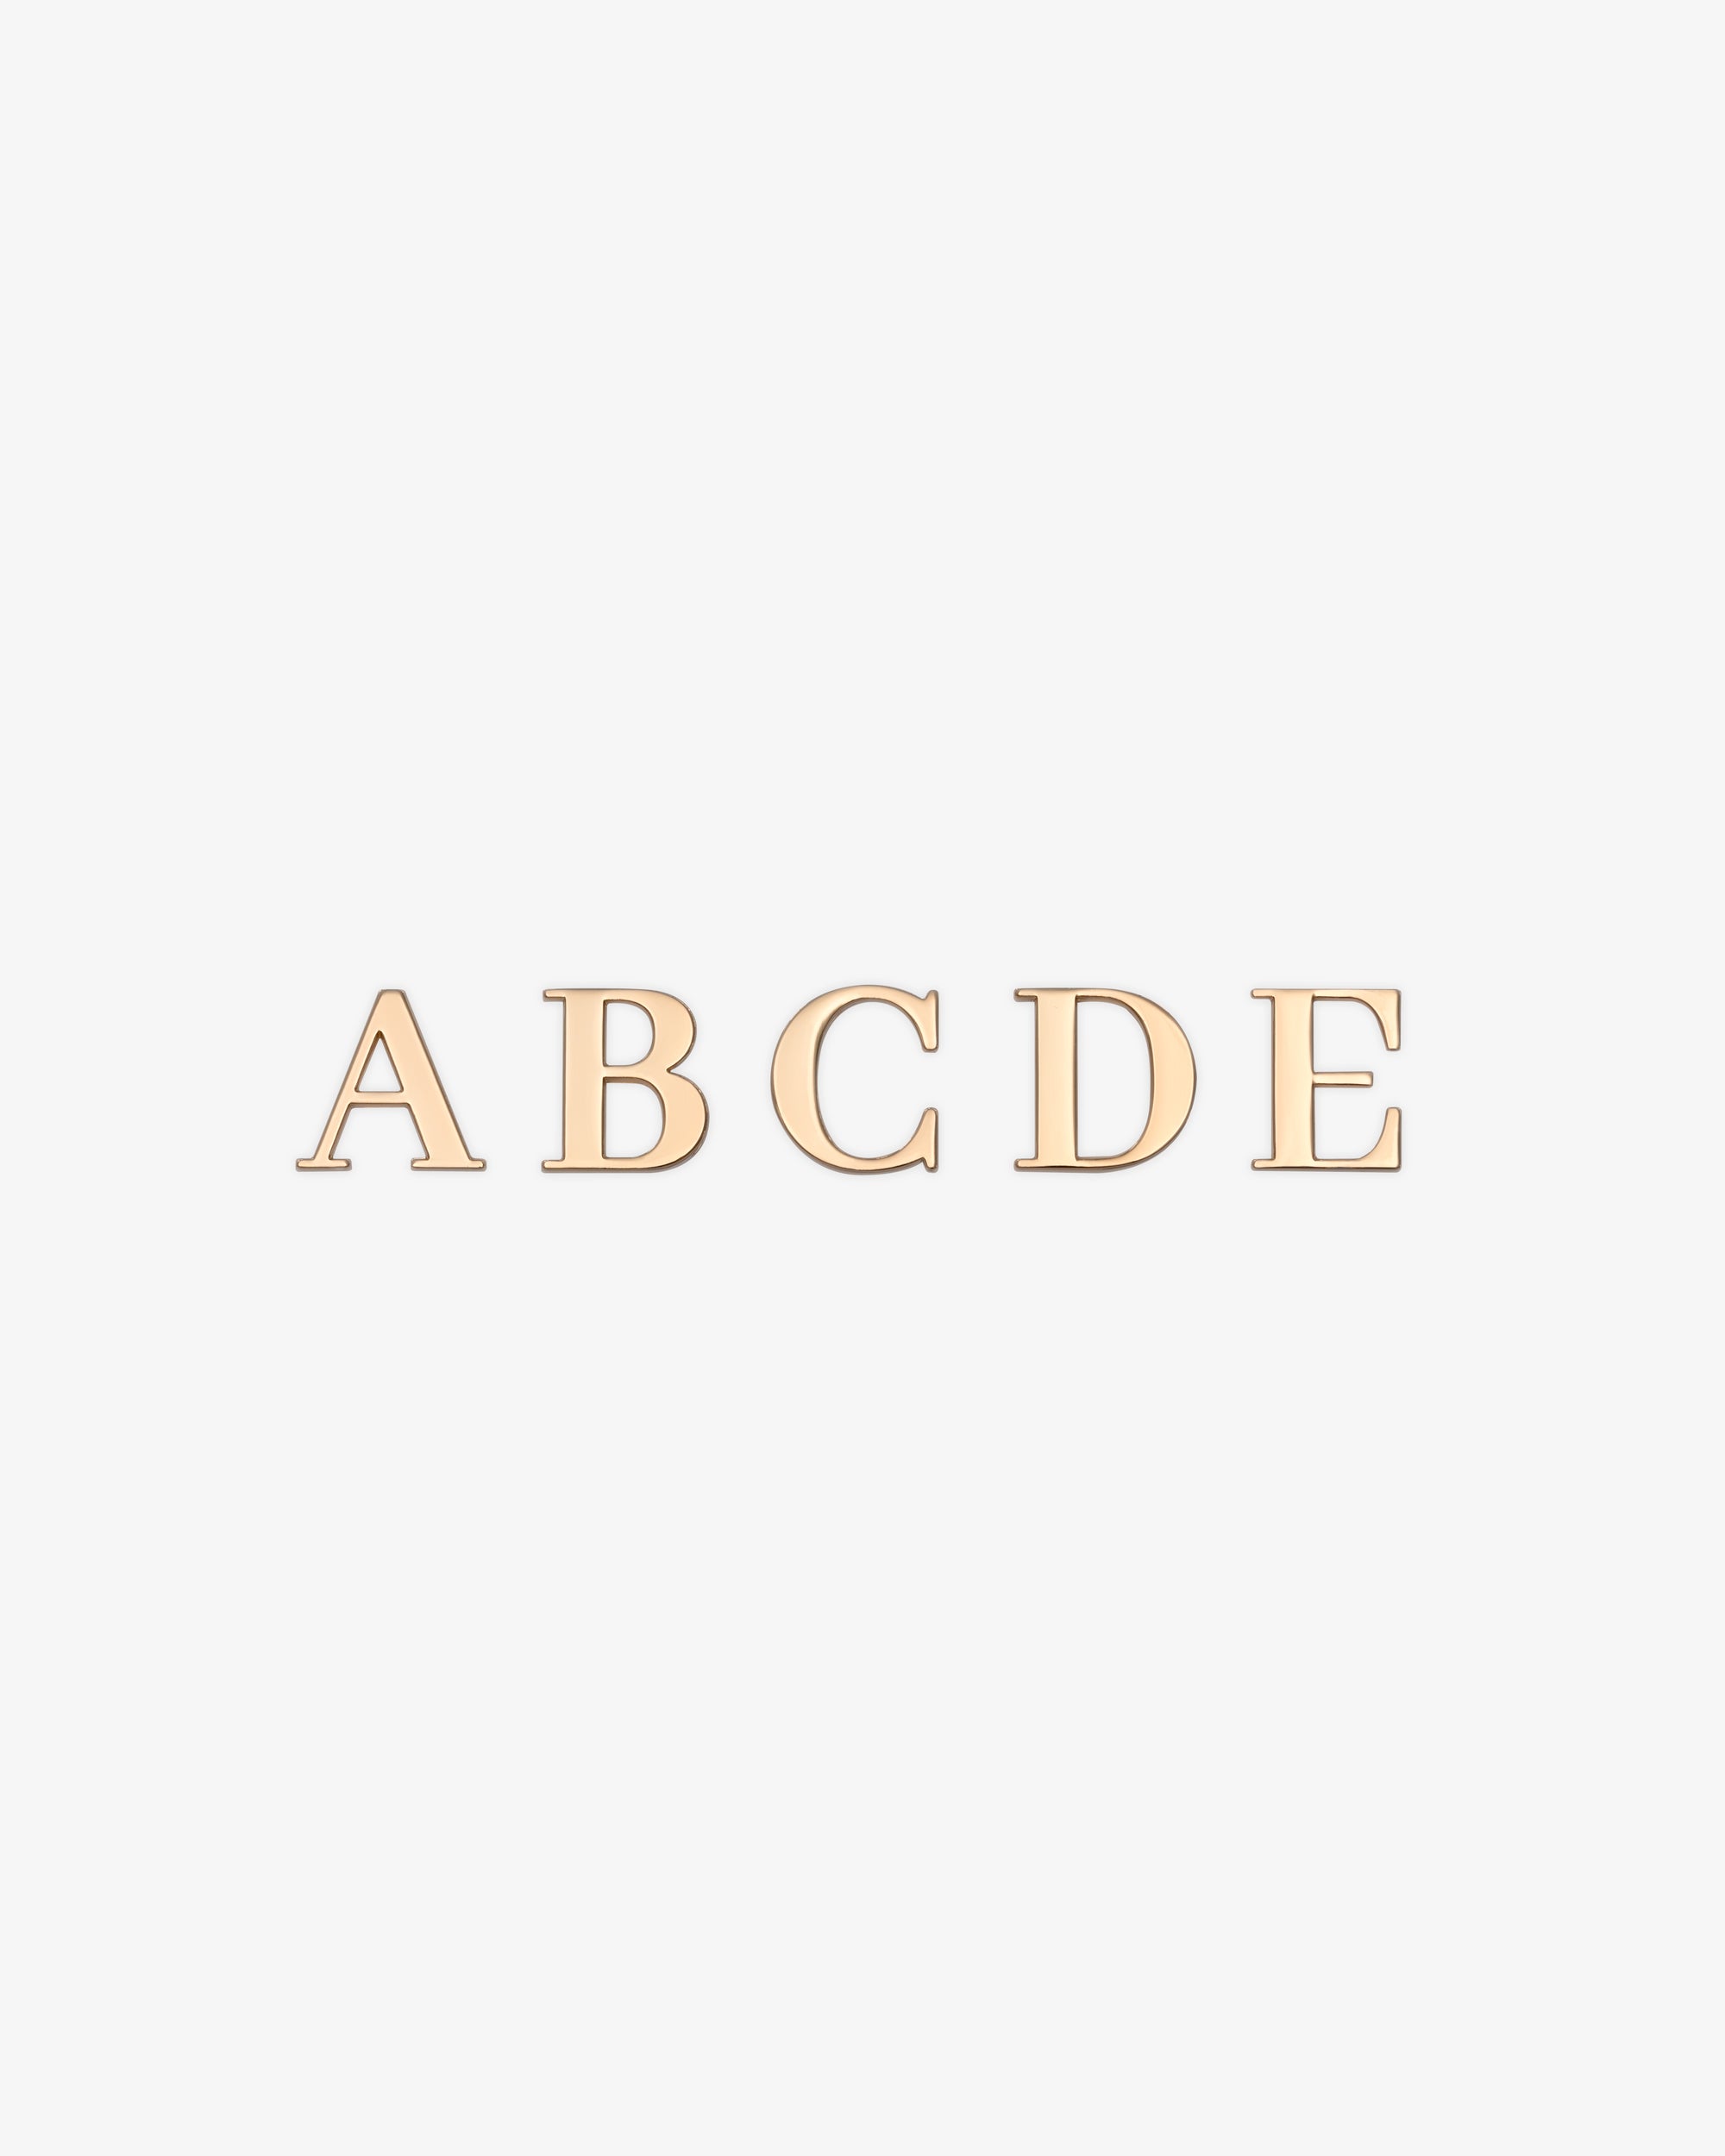 Set of 5 Serif Letters or Symbols in Gold